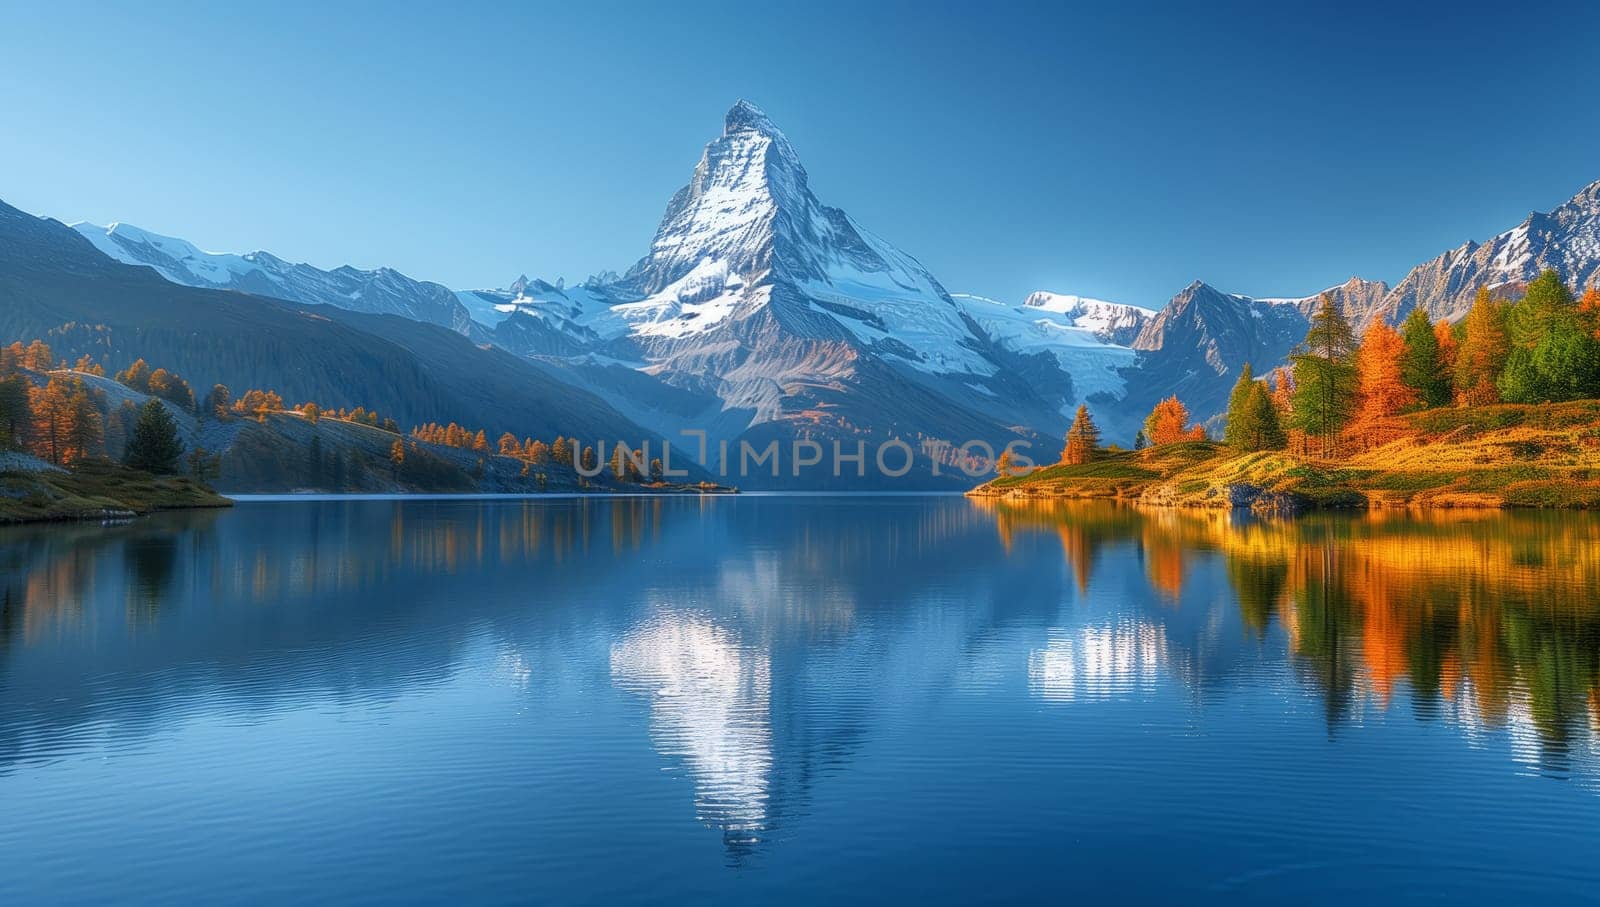 A mountain reflecting in lake with trees and sky in background by richwolf